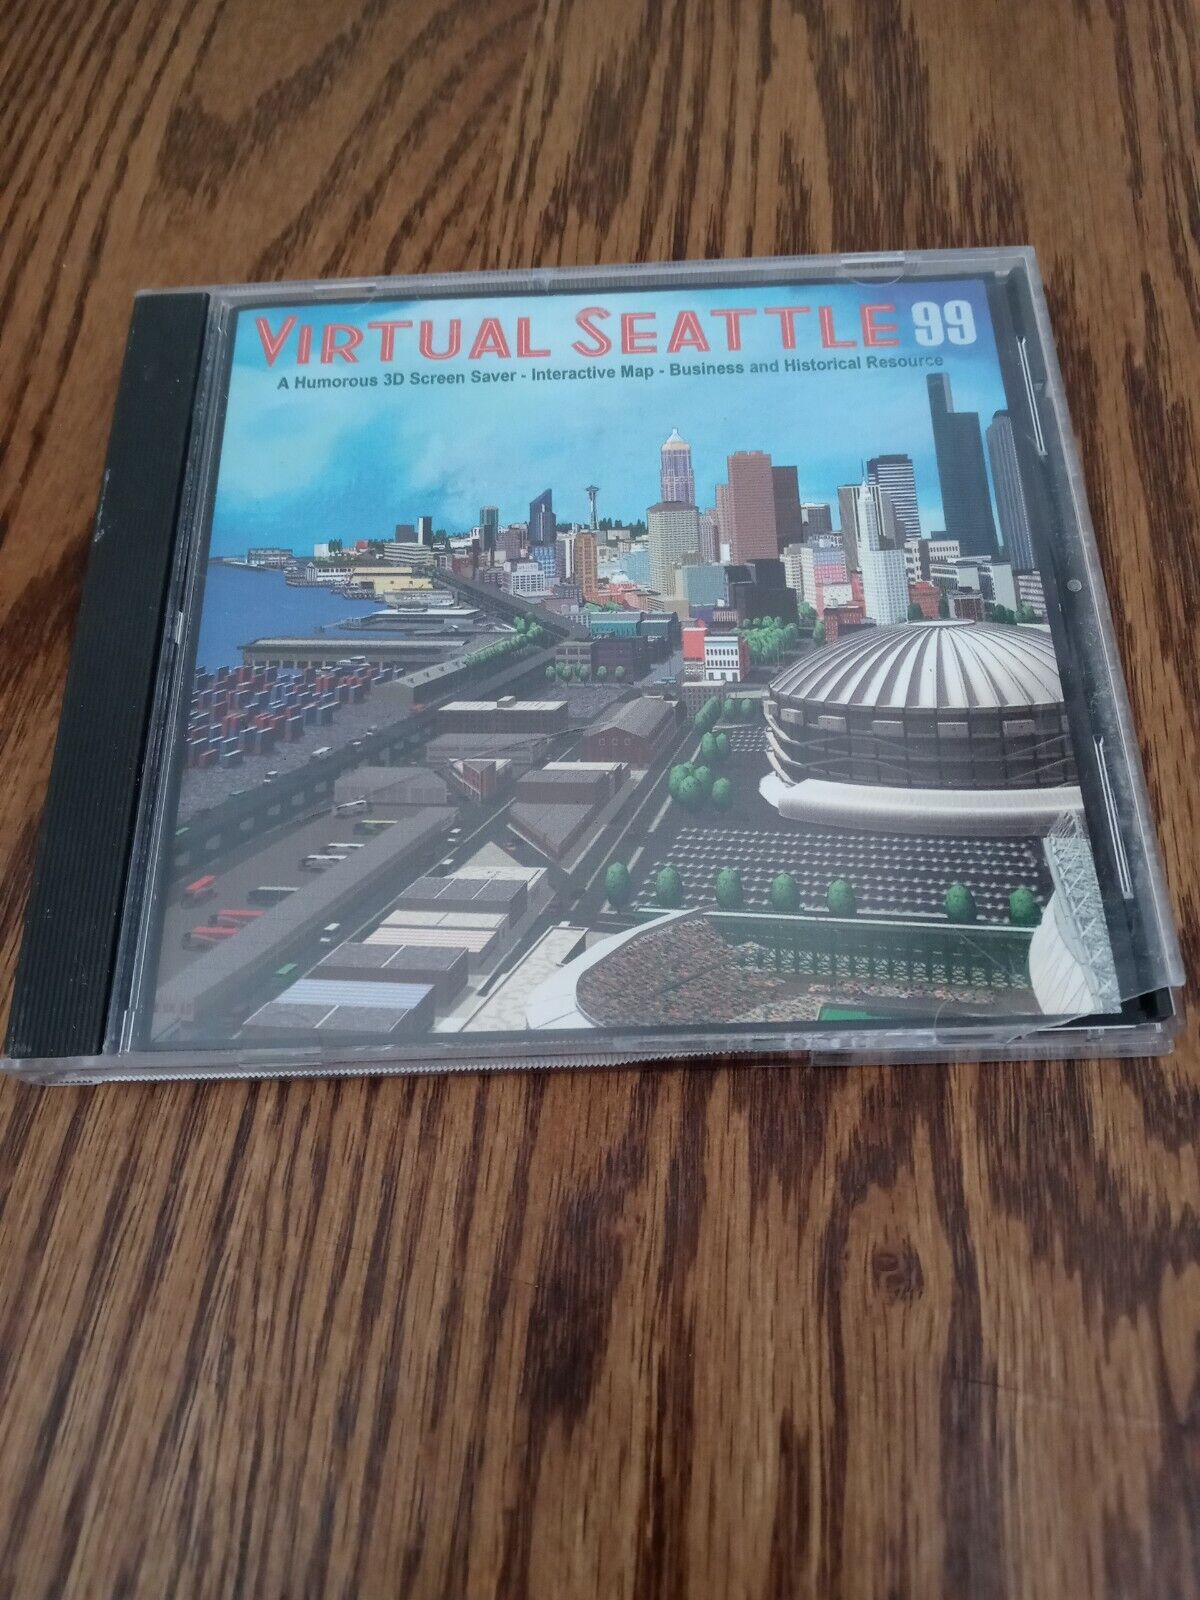 VINTAGE VIRTUAL SEATTLE 99 -3D SCREEN SAVER INTERACTIVE MAP -CD ROM FOR PC & MAC